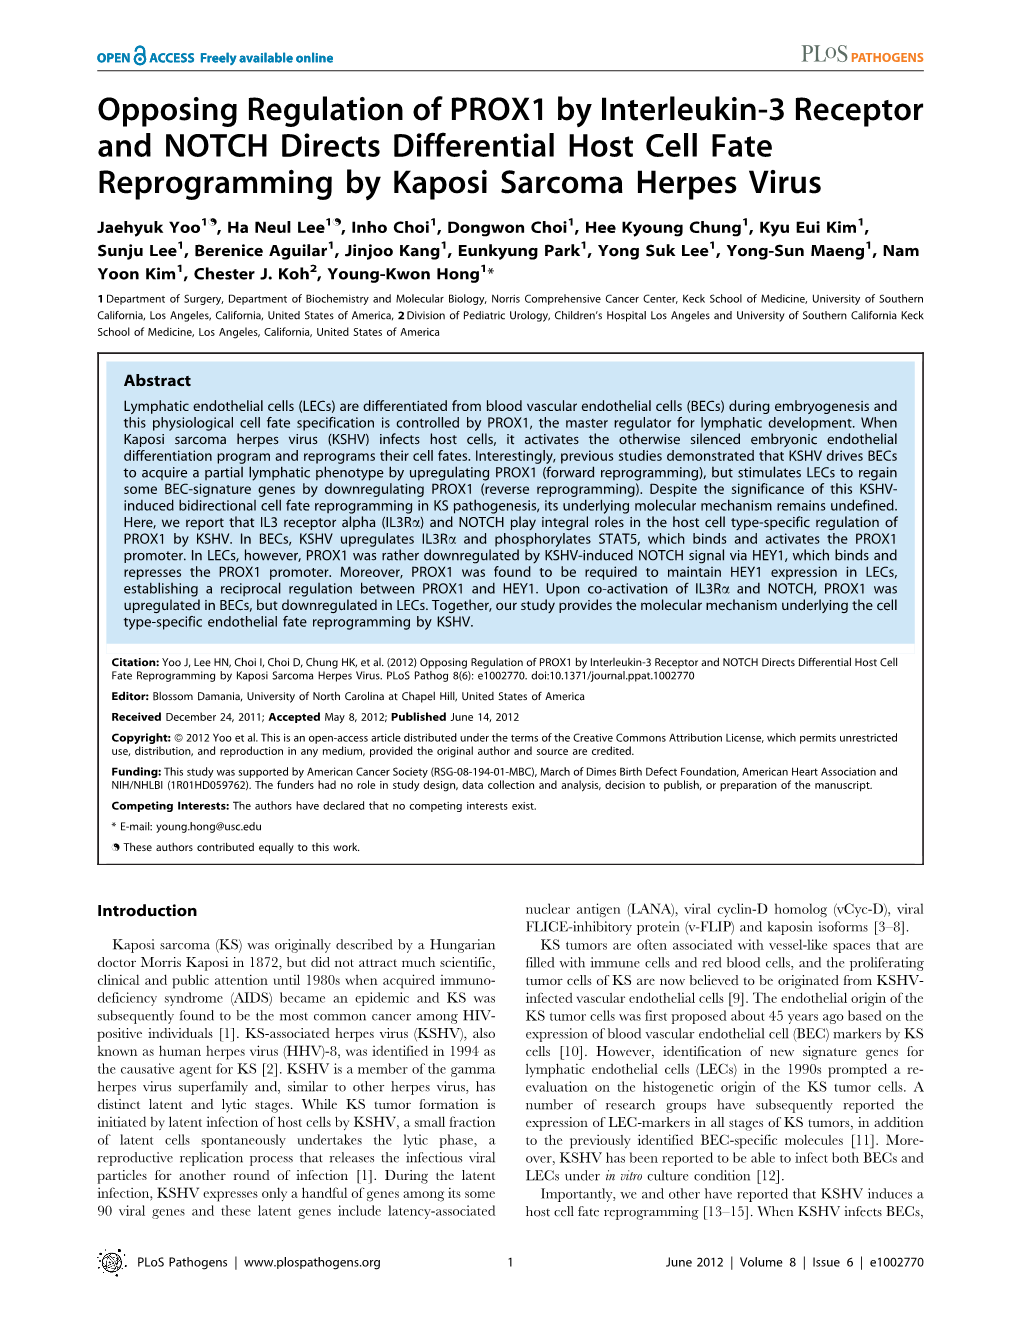 Opposing Regulation of PROX1 by Interleukin-3 Receptor and NOTCH Directs Differential Host Cell Fate Reprogramming by Kaposi Sarcoma Herpes Virus